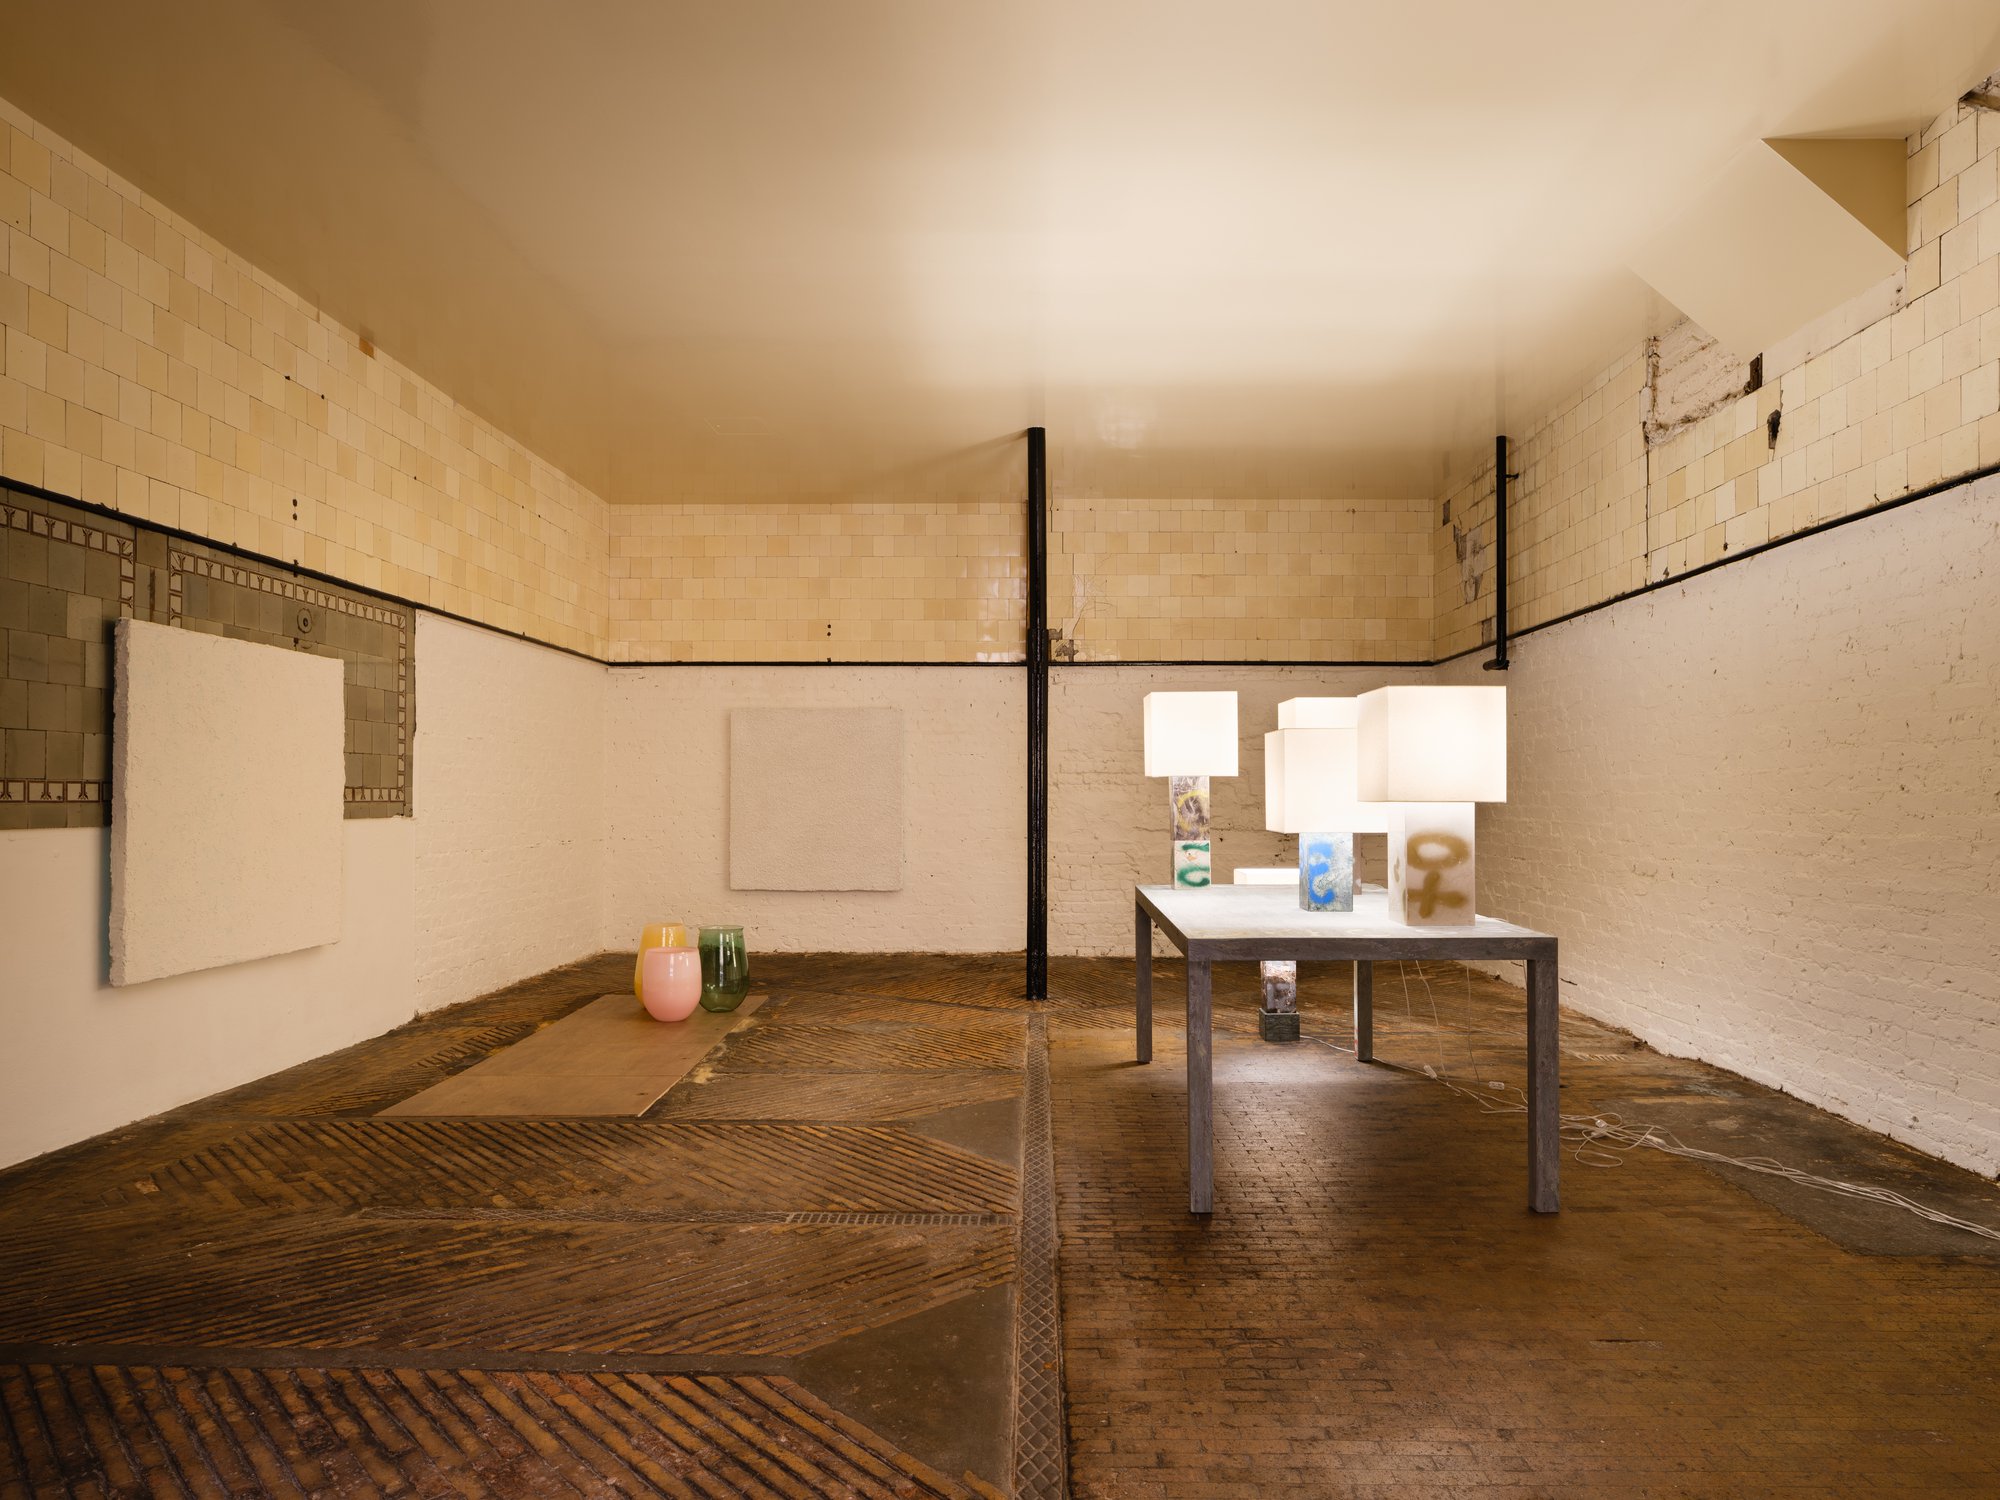 Installation view, Christodoulos Panayiotou, March, April, November, Rodeo, London, 2021